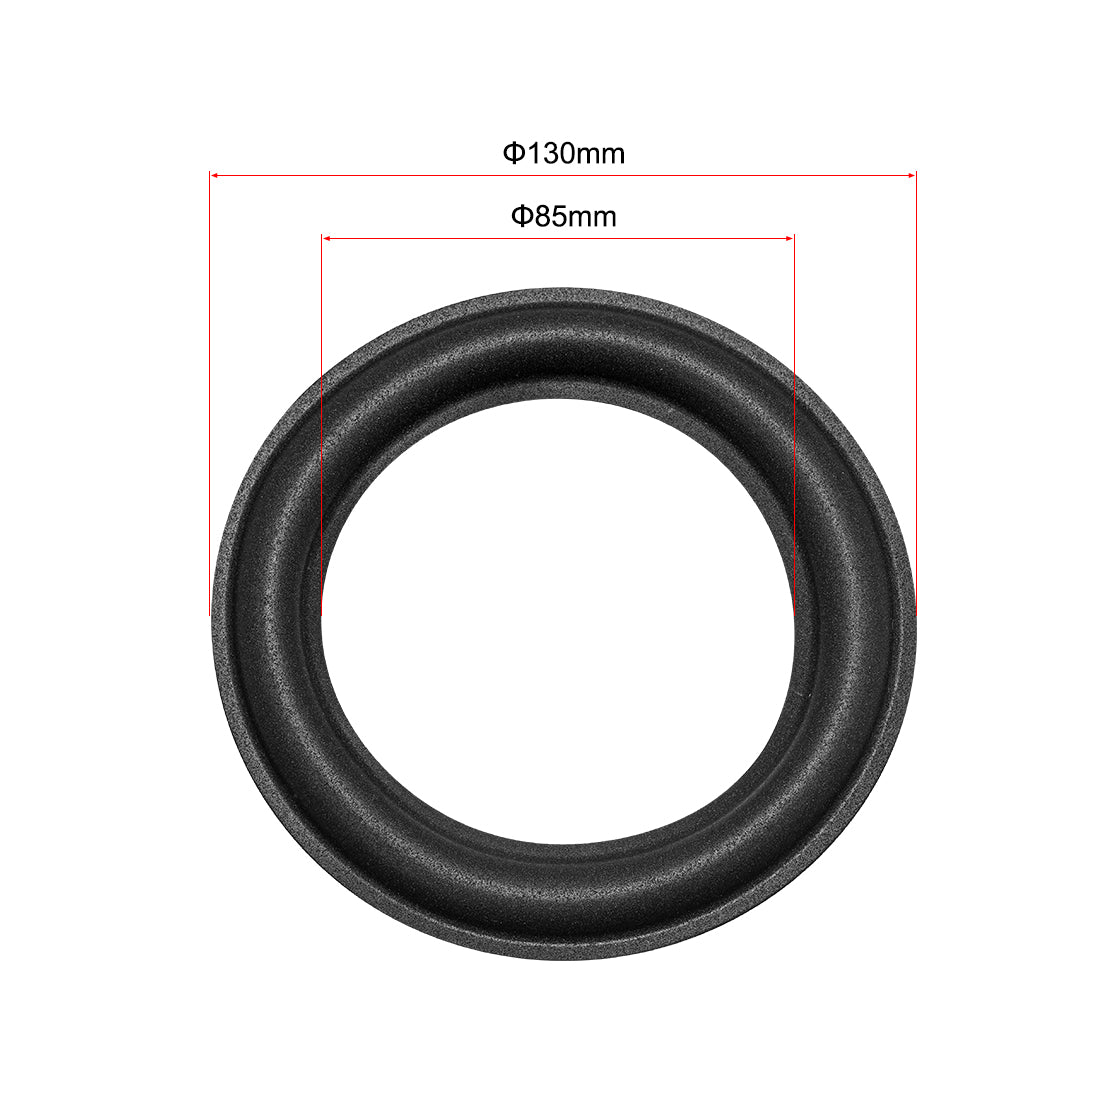 uxcell Uxcell 5.2 Inch Speaker Foam Edge Surround Rings Replacement Parts for Speaker Repair or DIY 2pcs